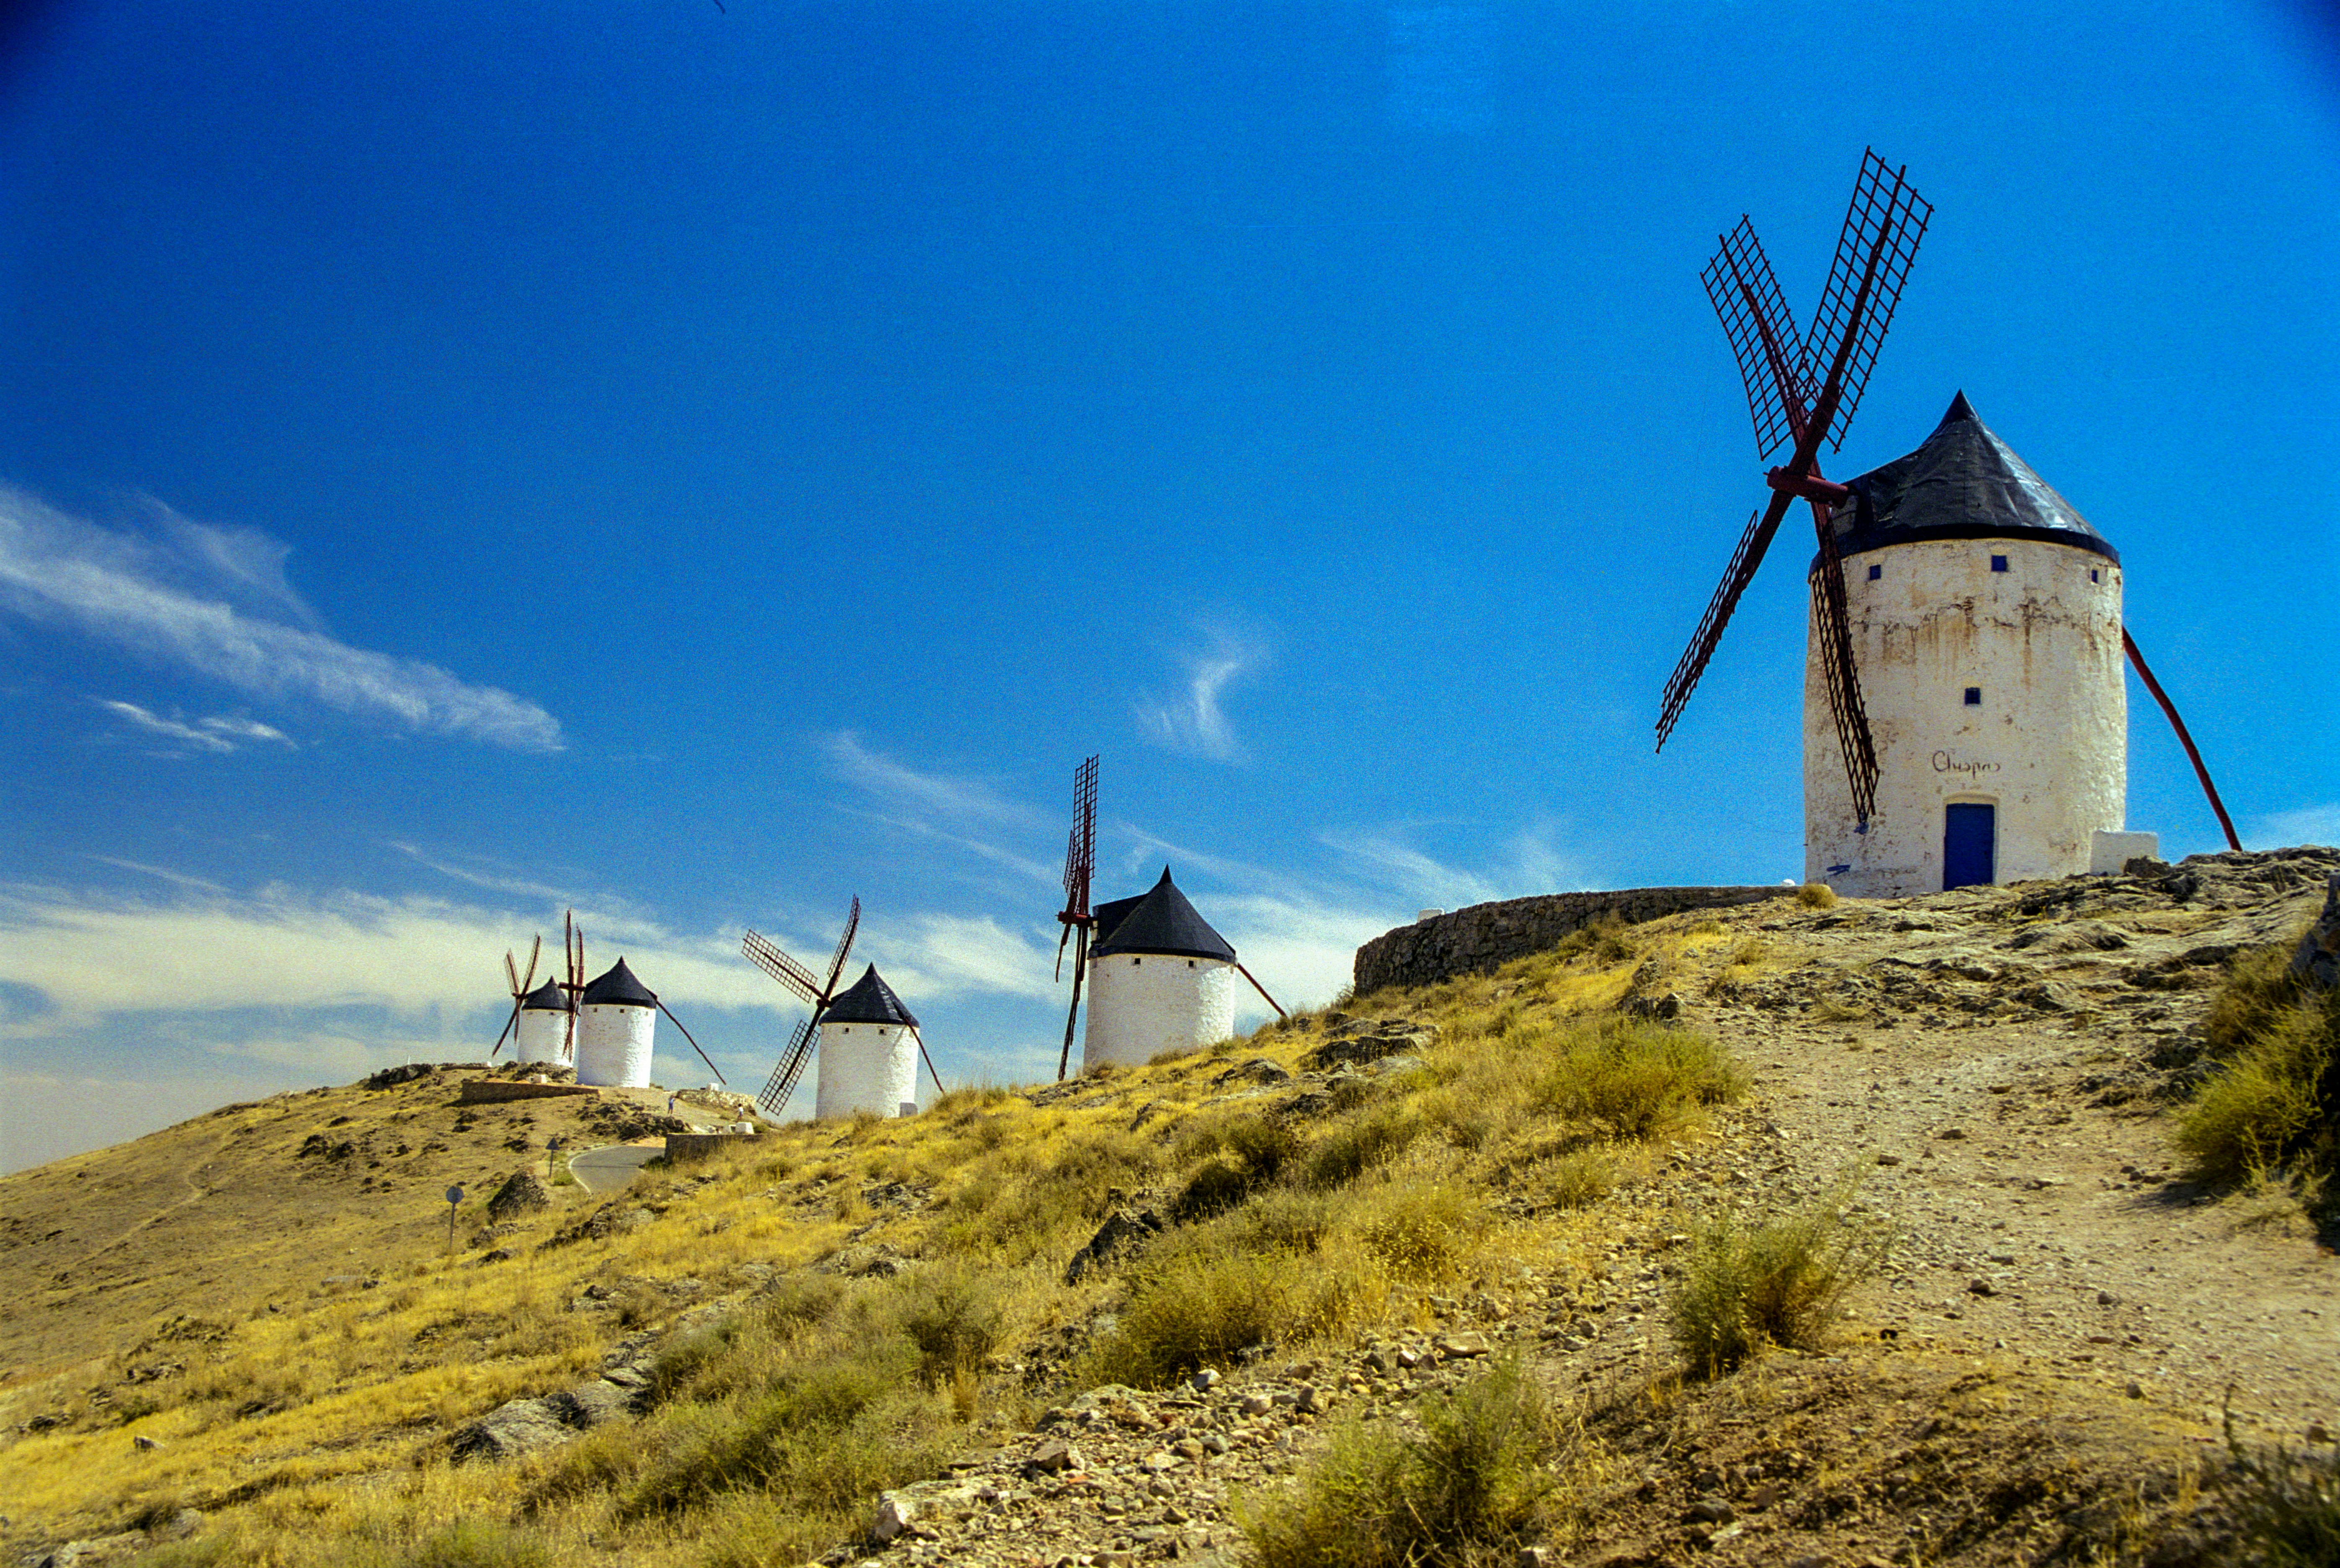 windmill on green grass field under blue sky during daytime